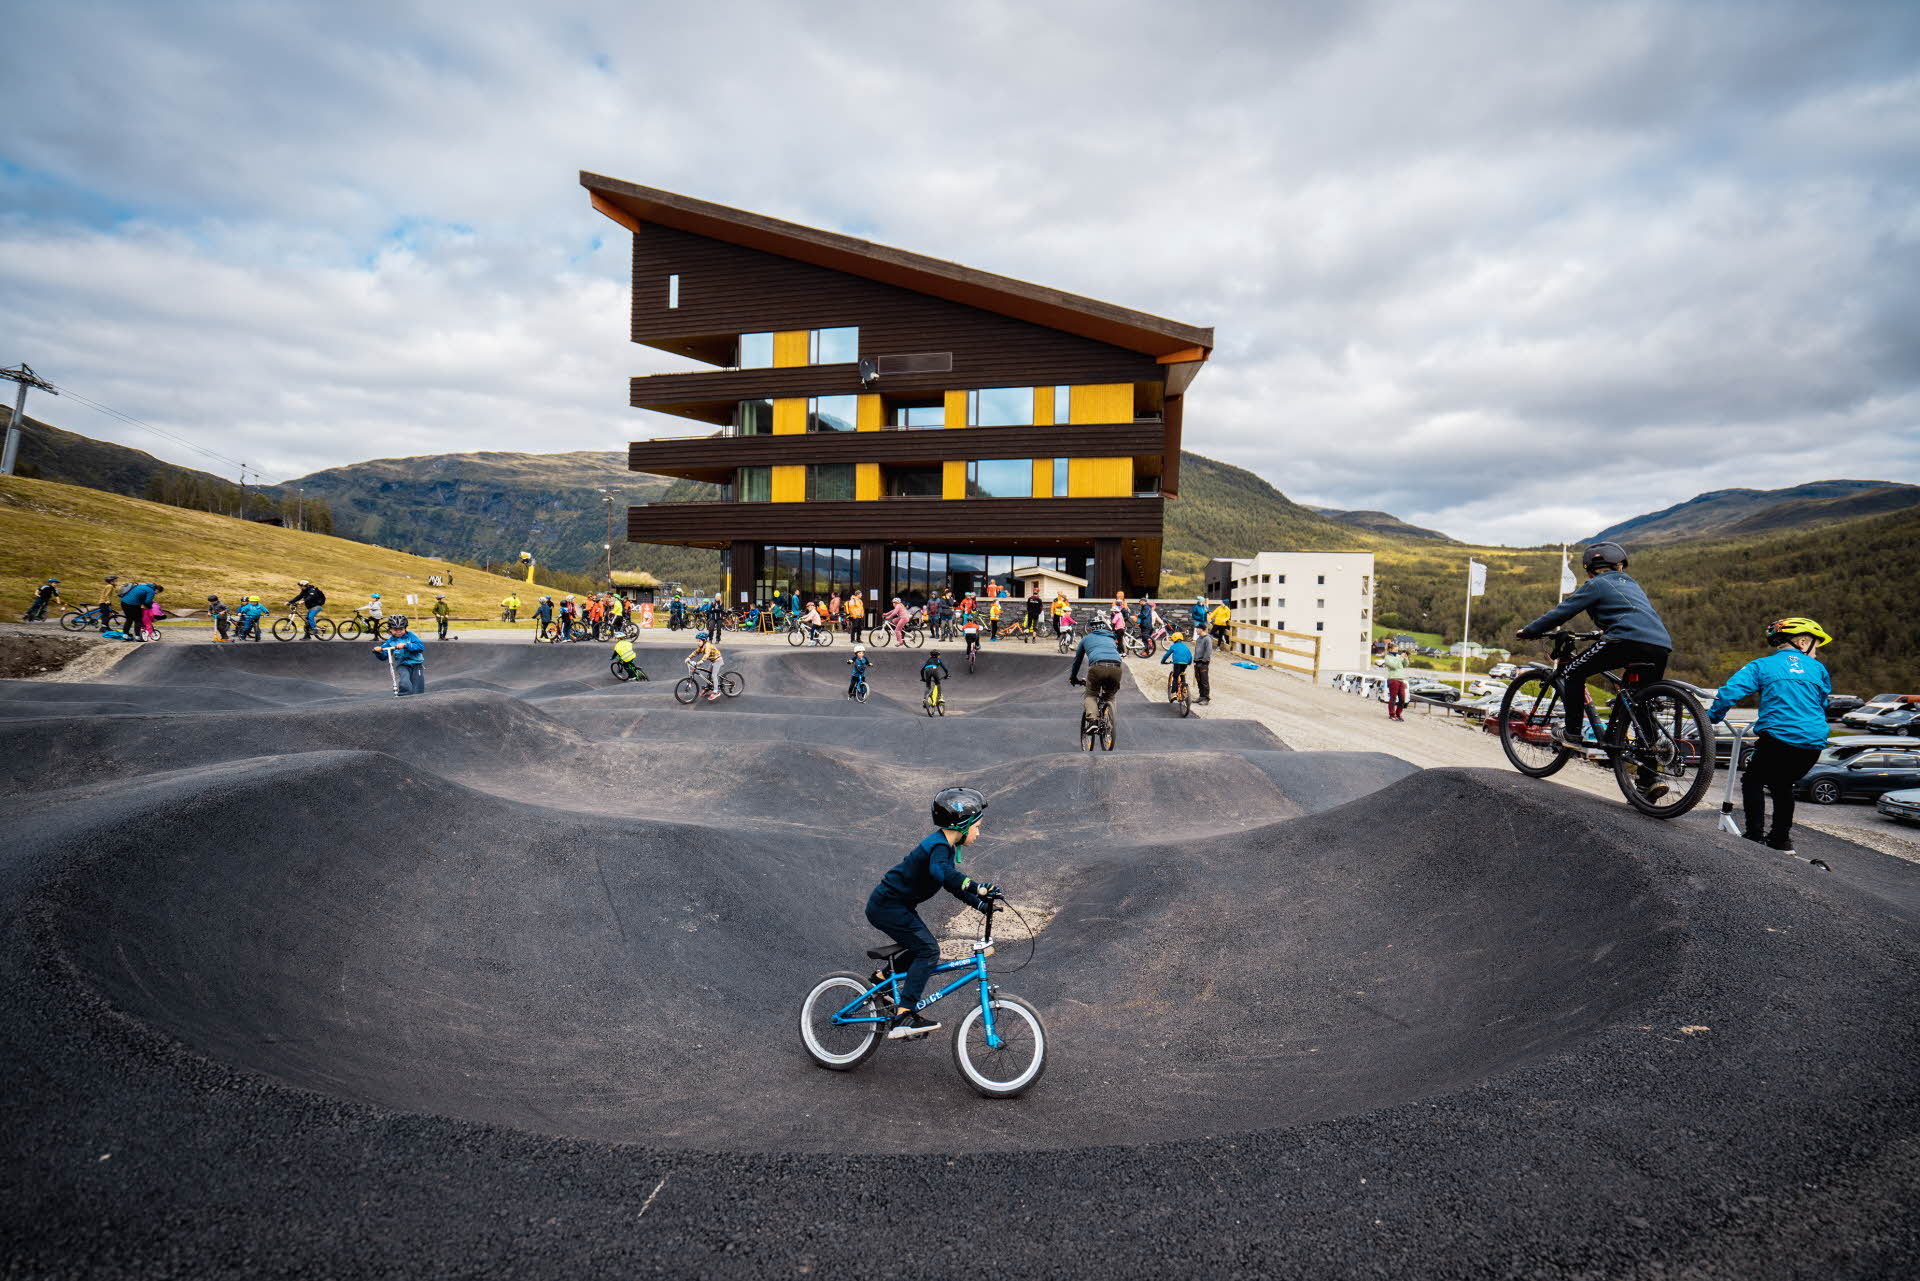 Children and adults cycling on the large pump track in front of Myrkdalen Hotel